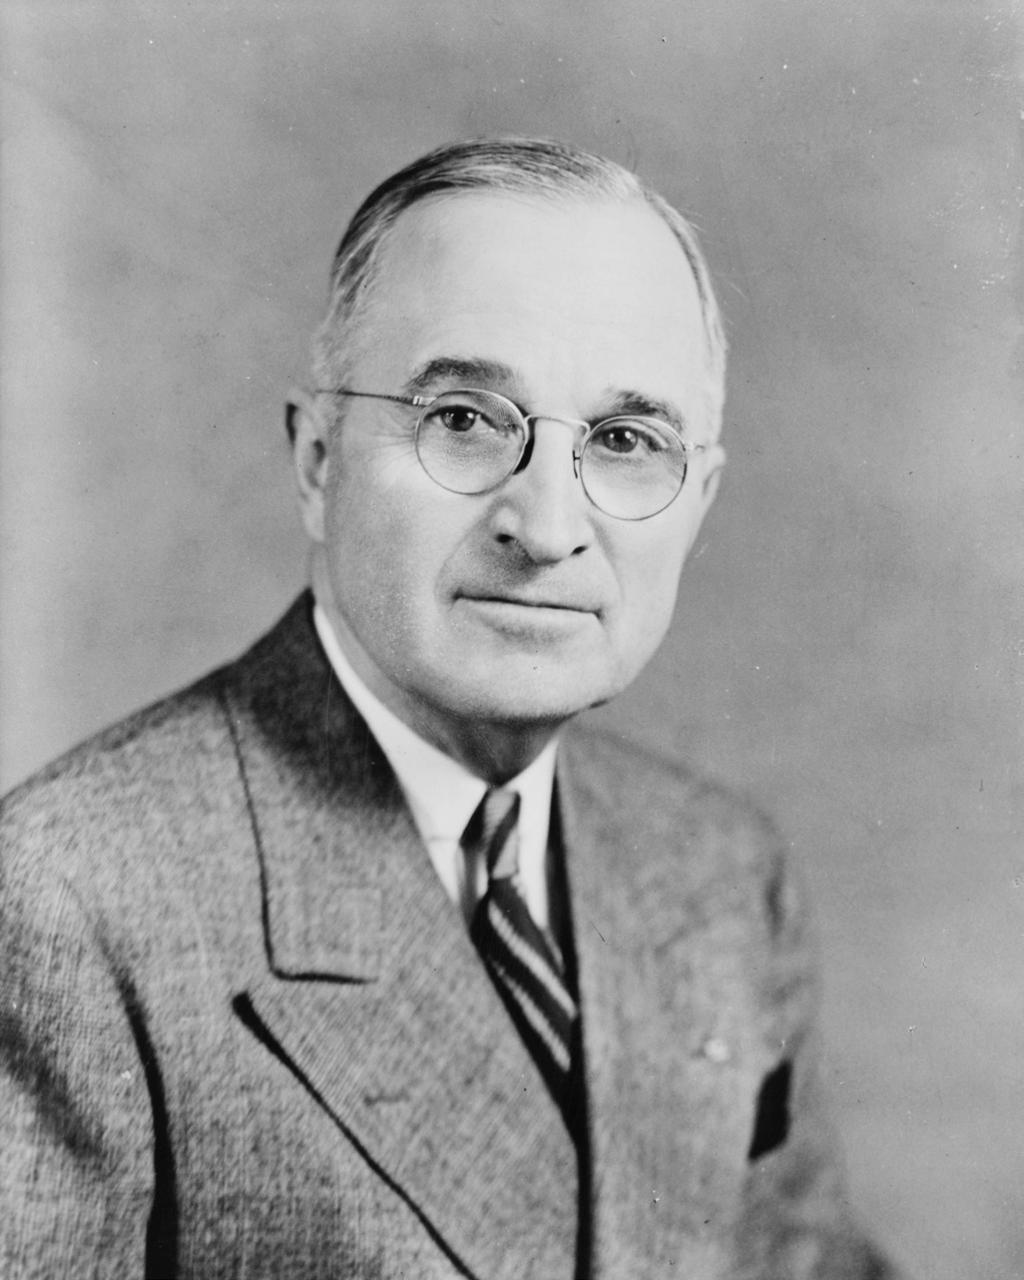 Possibility TWO: The atomic bomb changed TRUMAN S attitude.